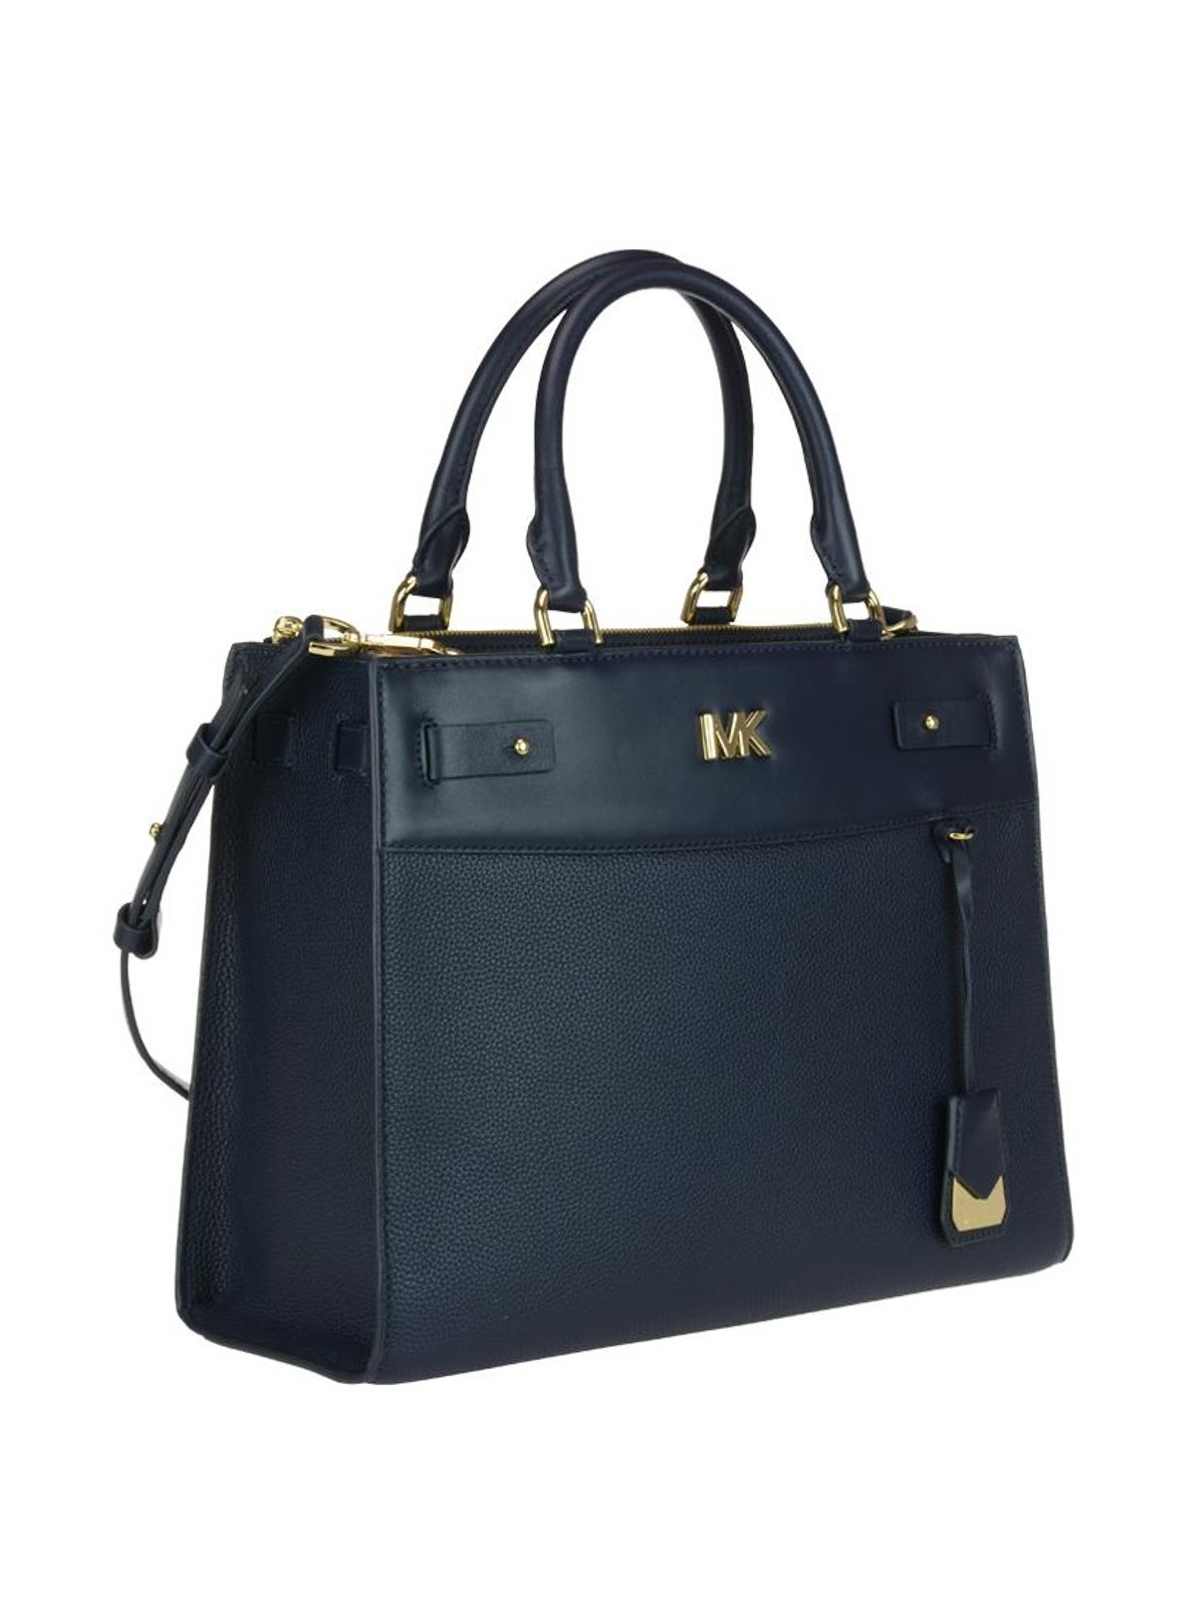 navy blue leather tote - totes bags 